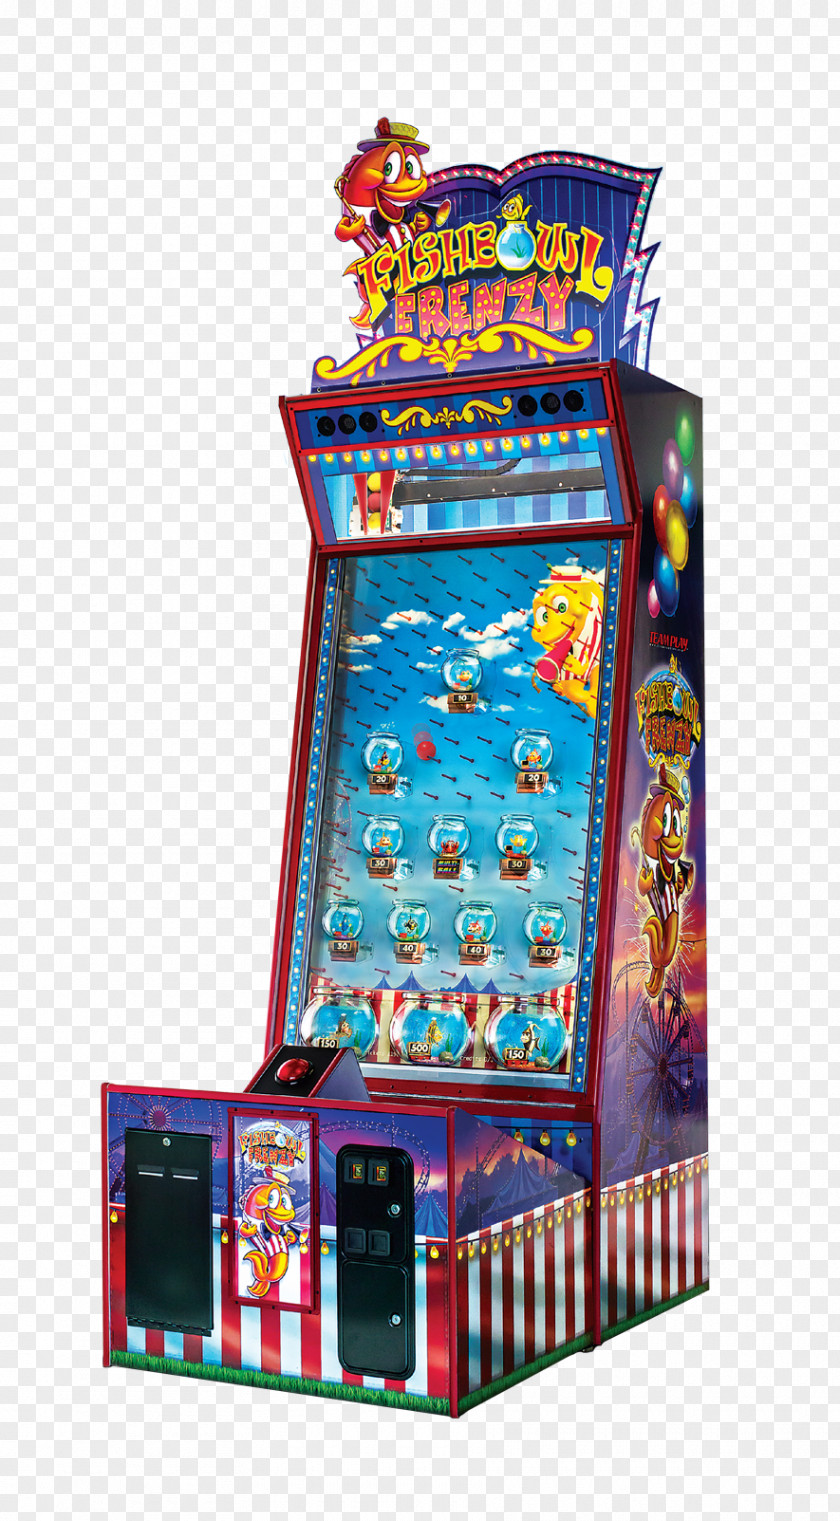 Fishbowl Frenzy Arcade Game Redemption Amusement Konami 80's Gallery PNG